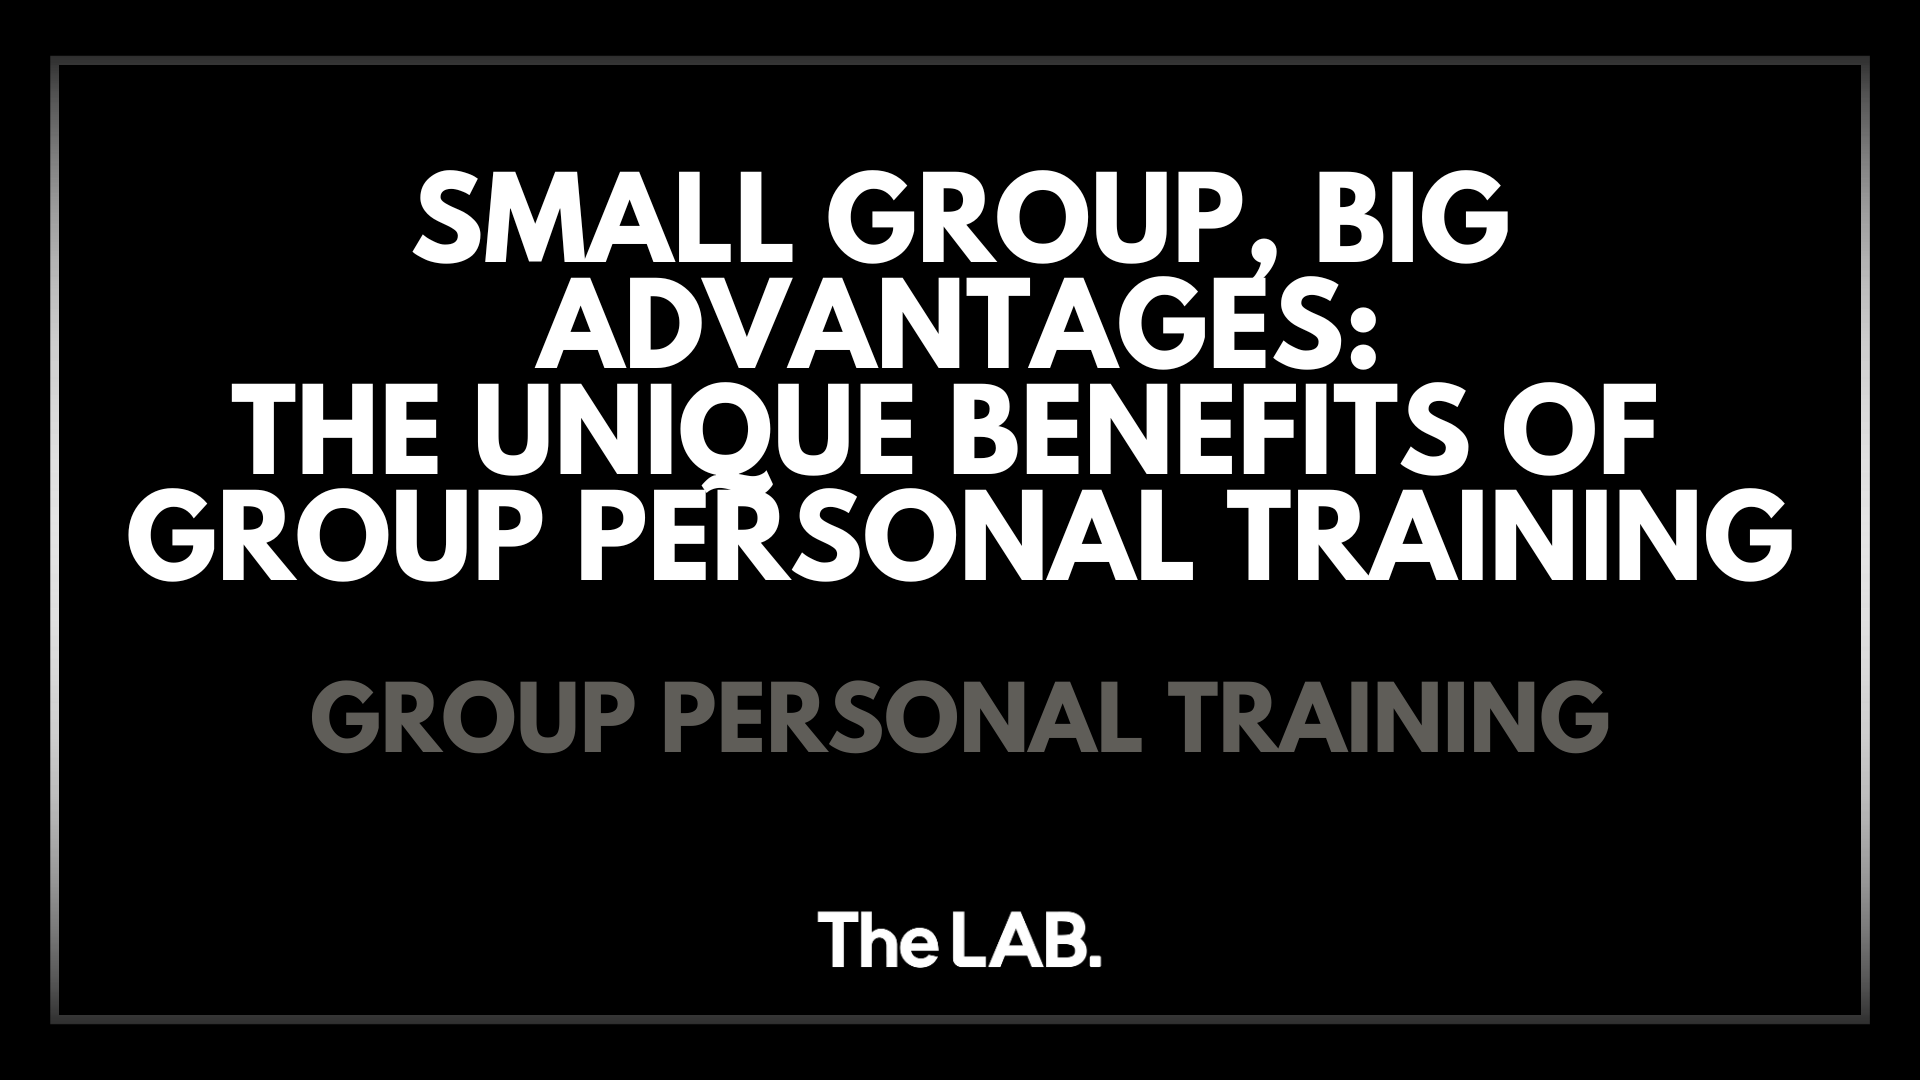 Small Group, Big Advantages: The Unique Benefits of Group Personal Training